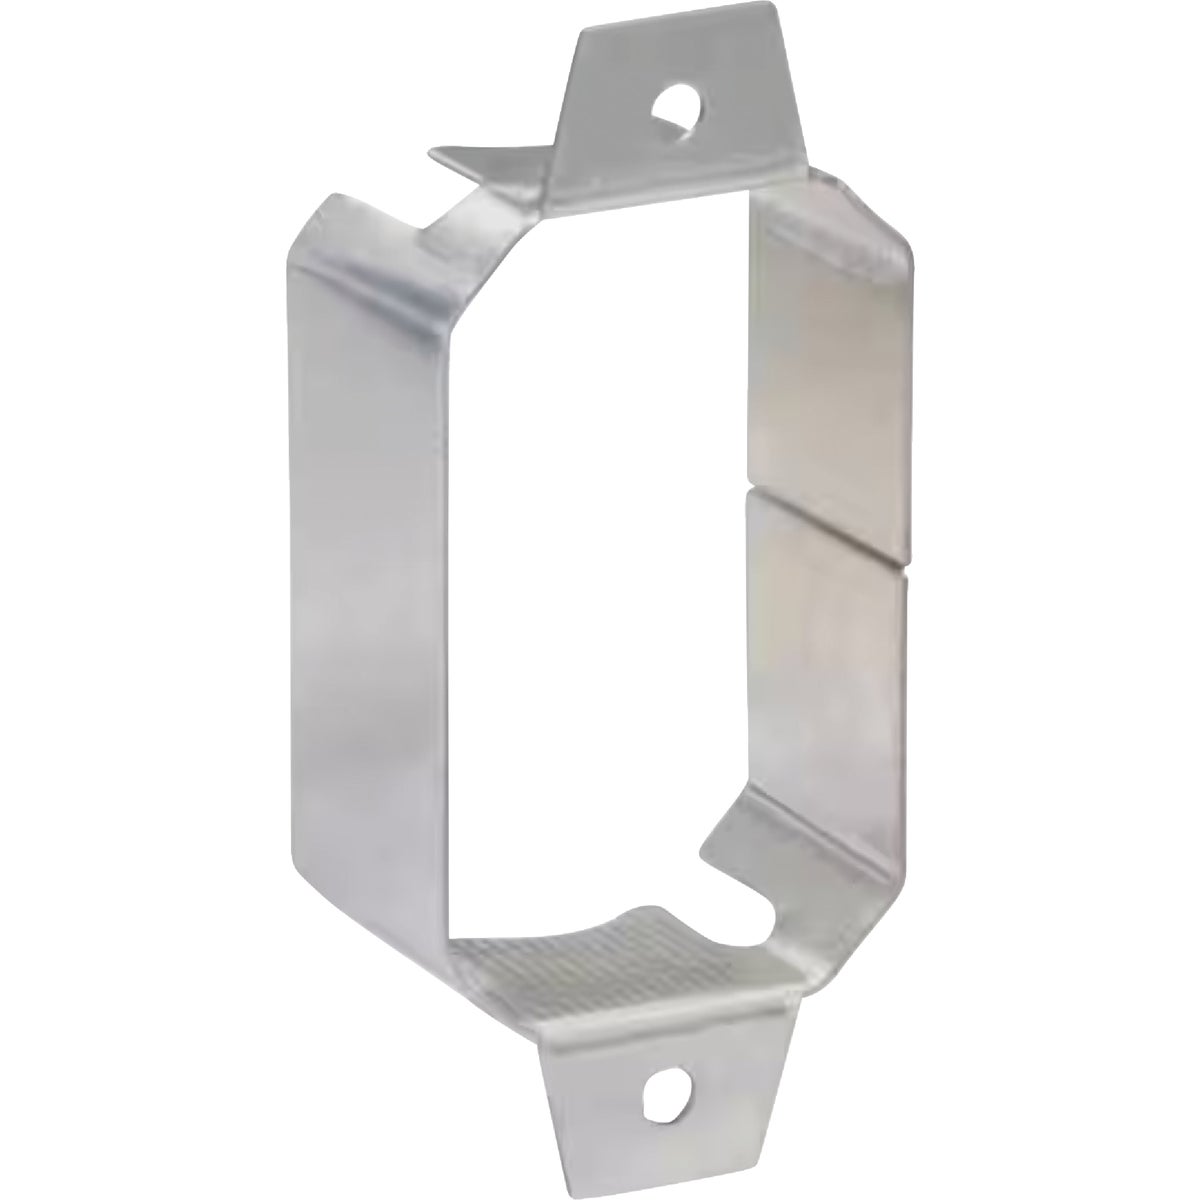 Item 506168, Switch box extension ring are used to support 2 or more toggle switches, 